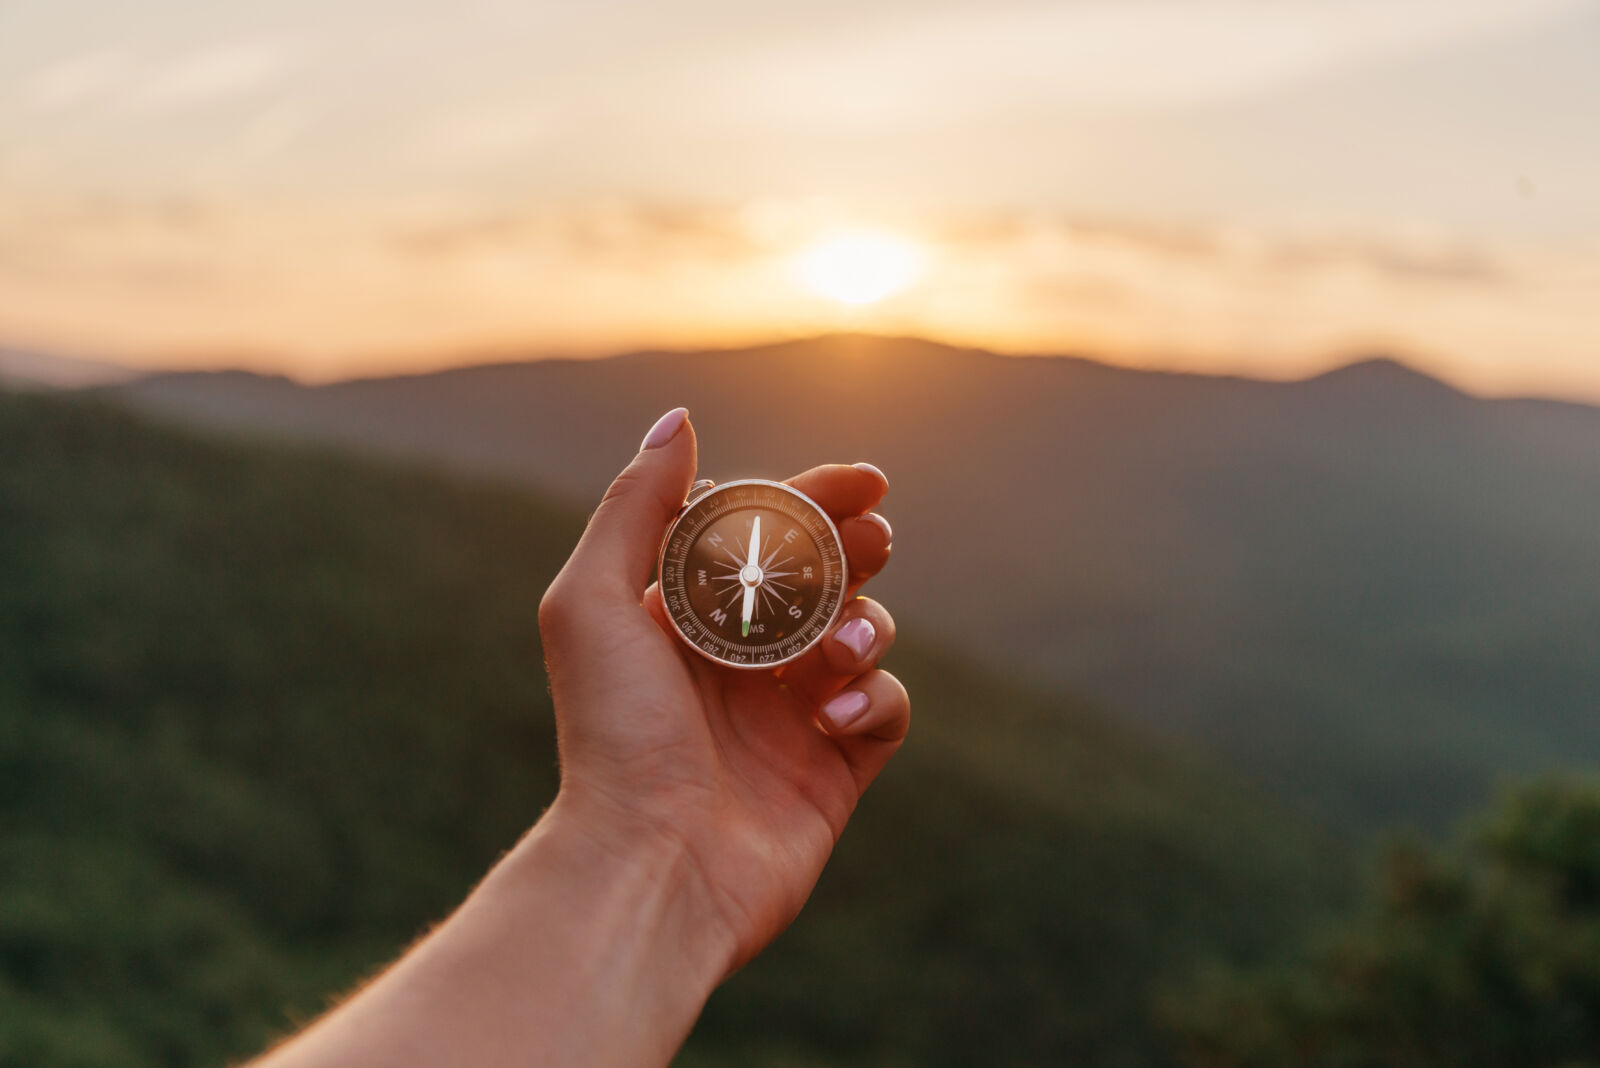 Explorer young woman holding compass in hand in summer mountains at sunrise, point of view. Concept of hiking and travel.